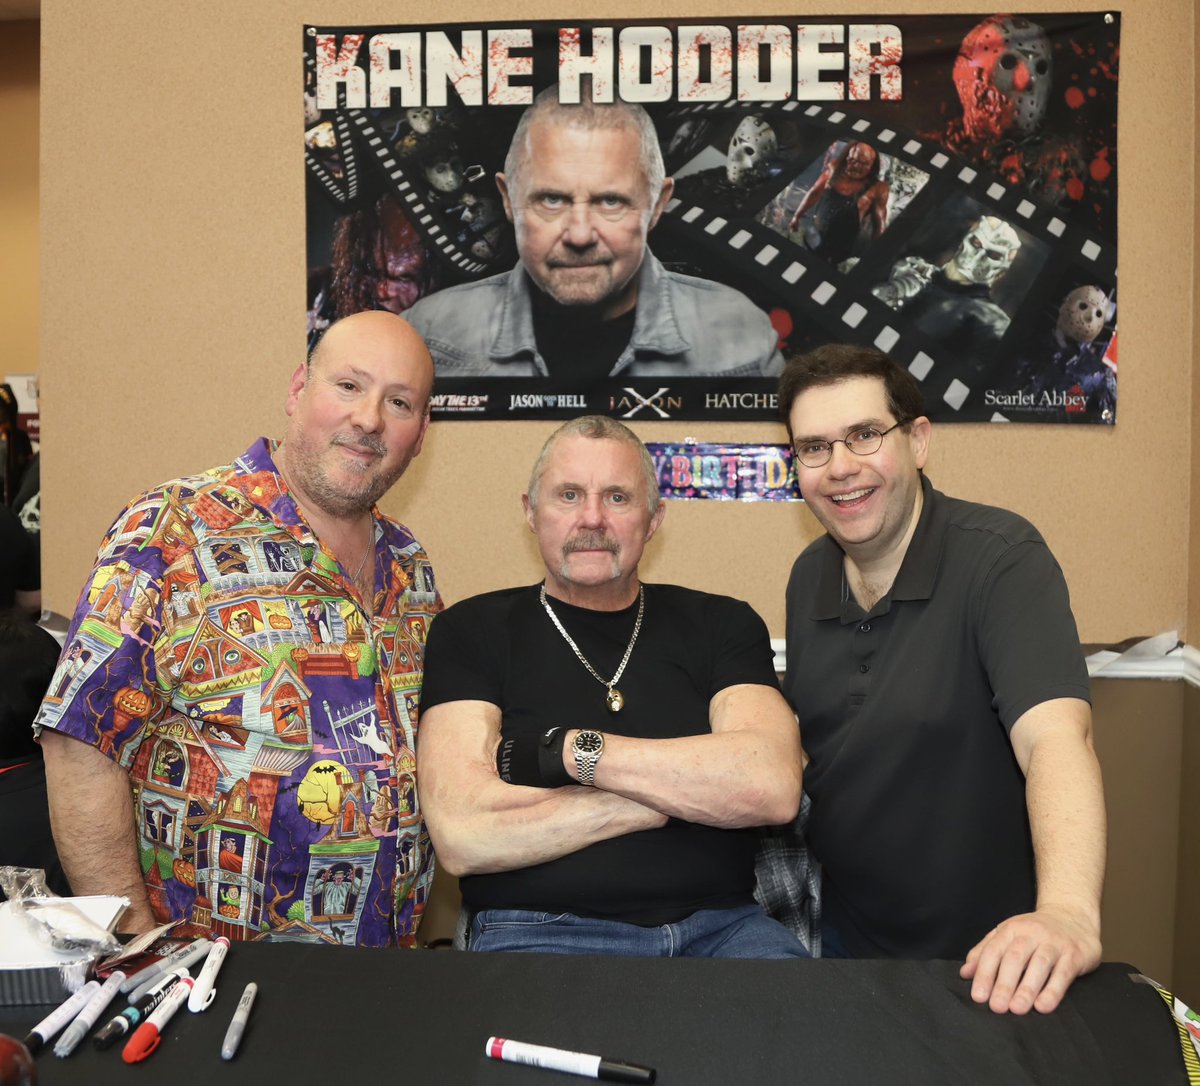 Me and Barry Brown meeting Kane Hodder at NJ Horror Con, last weekend.